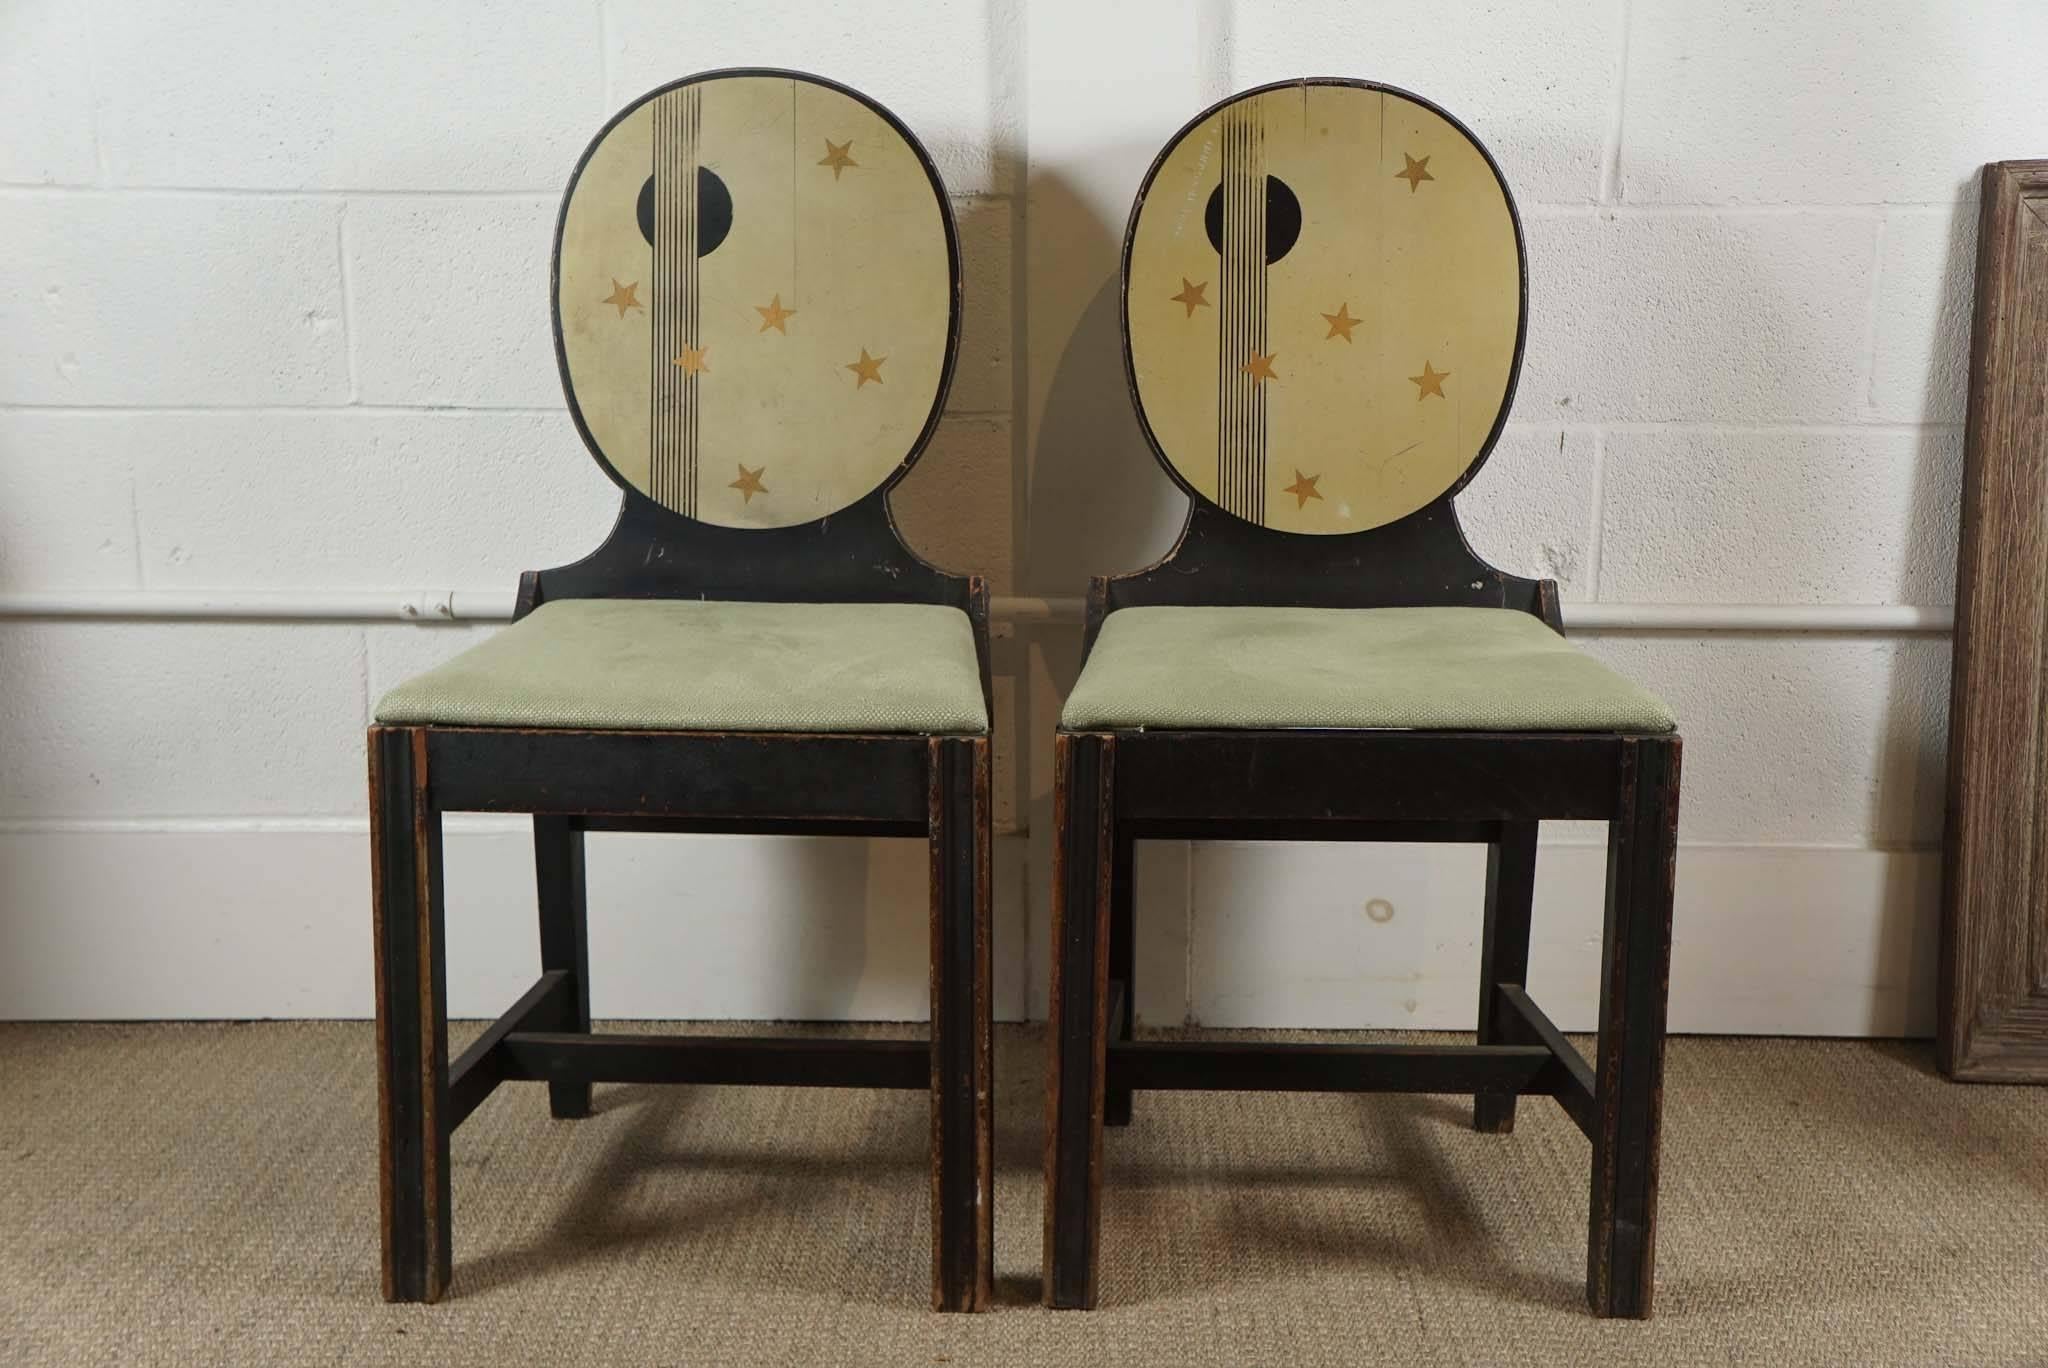 Here are two painted wooden chairs with oval backs. The chairs have a whimsical decorative detail with a star motif on front and back.